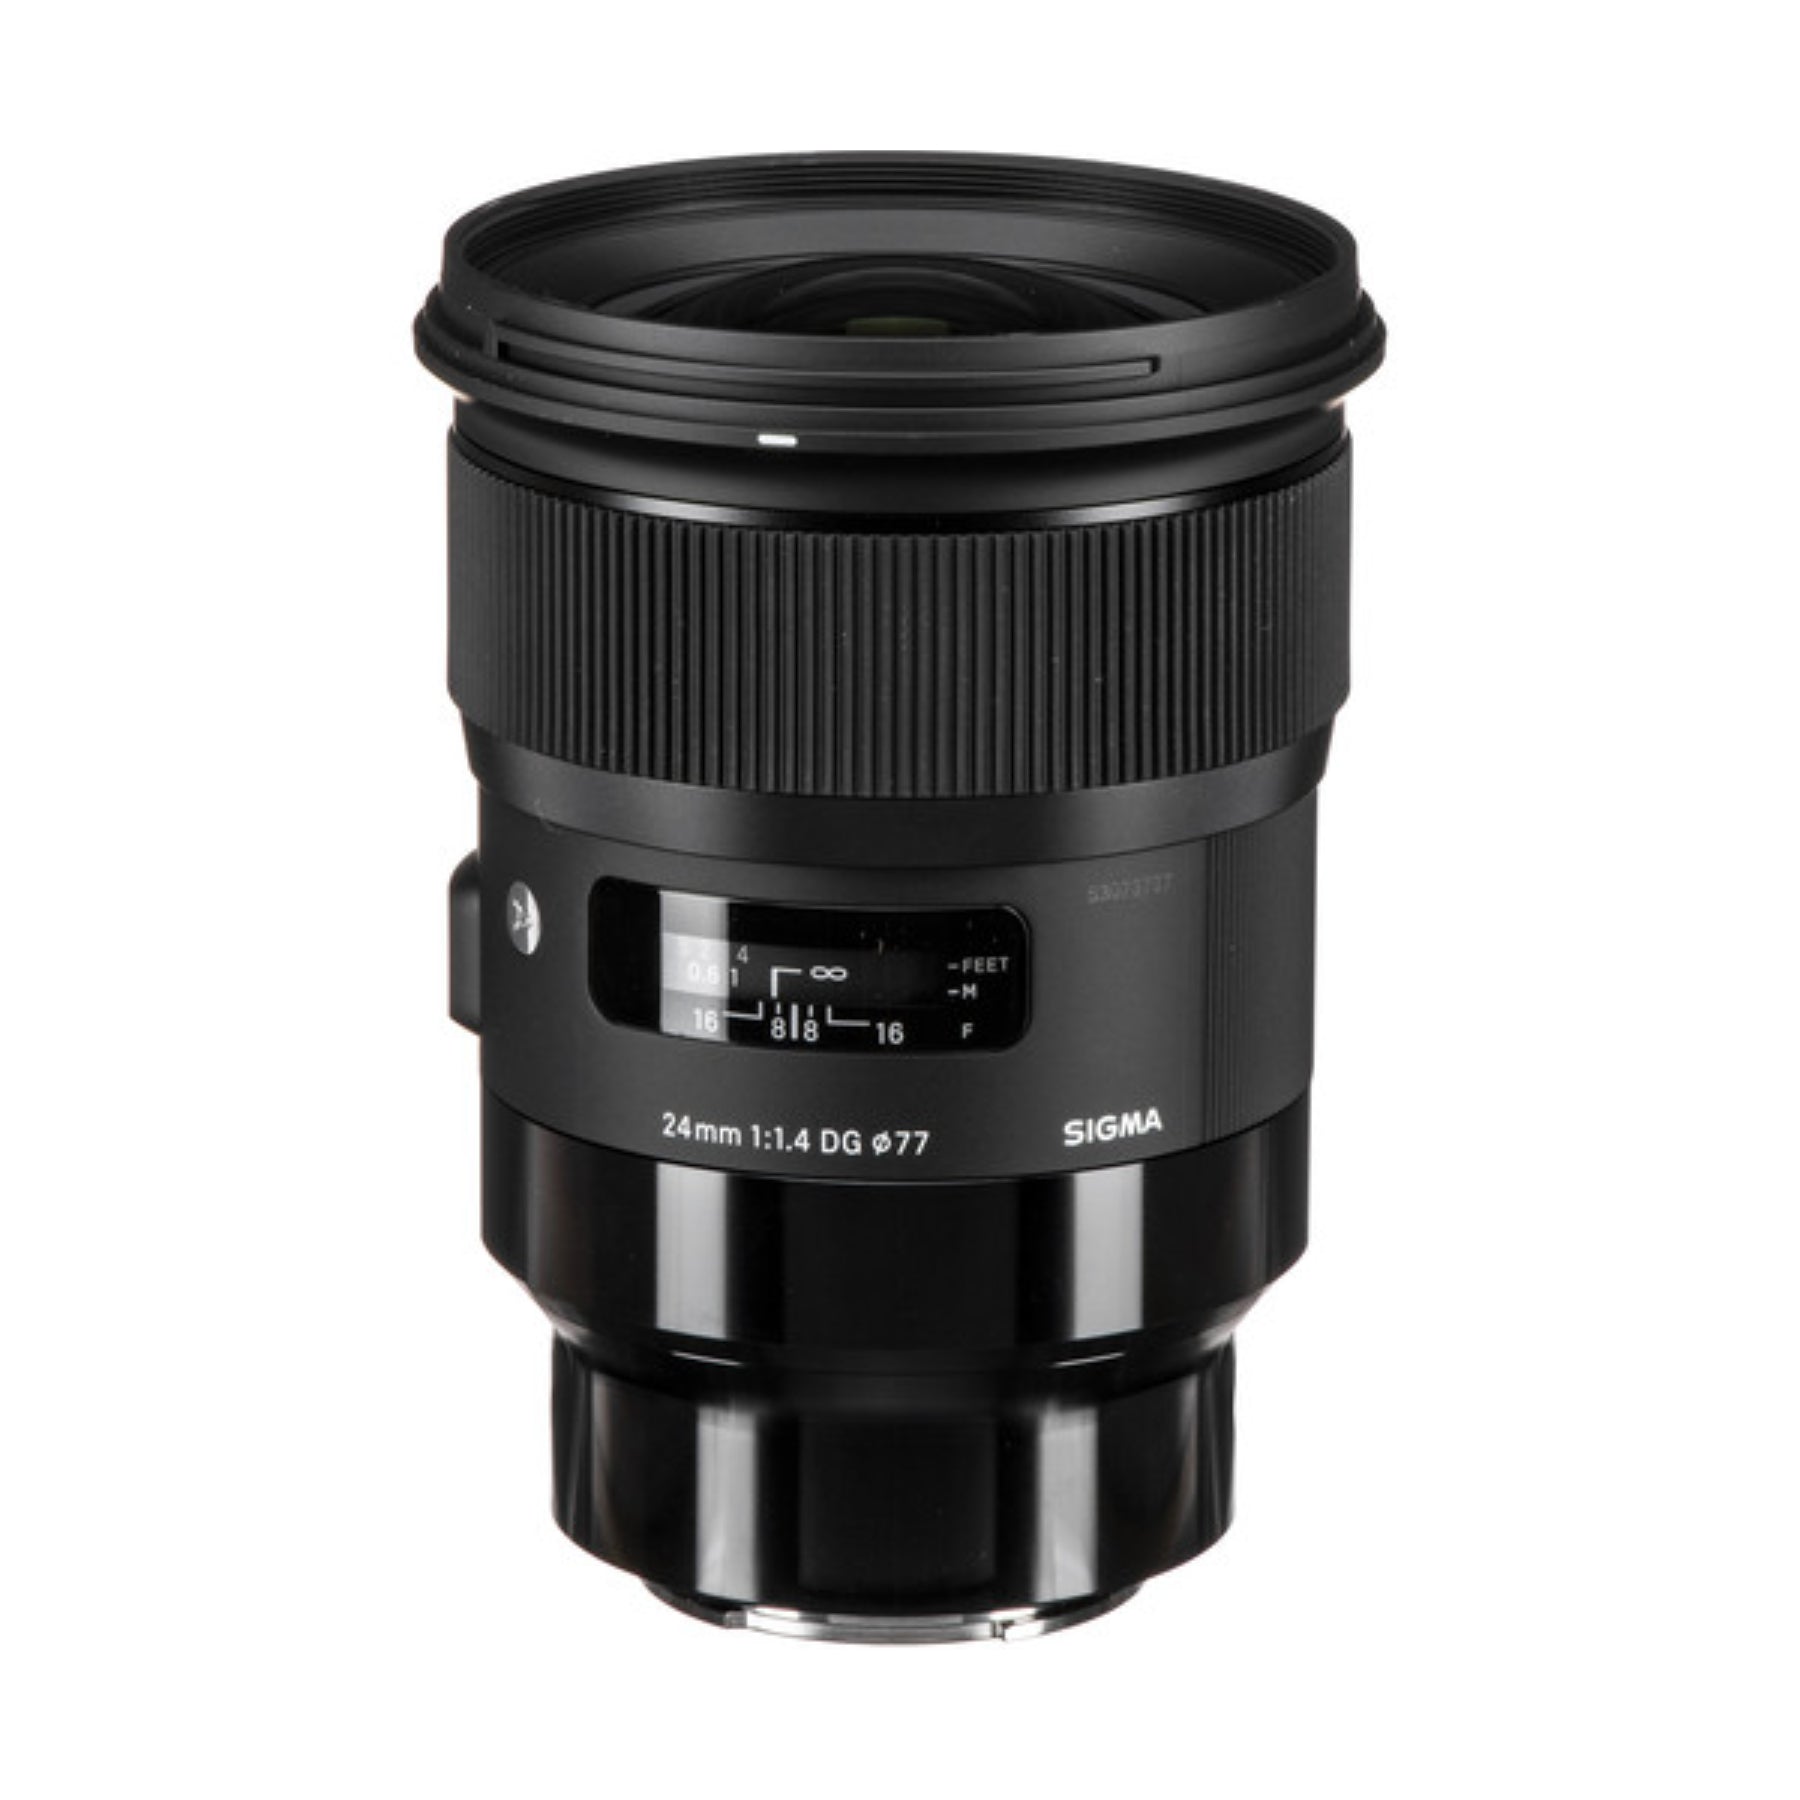 Sigma 24mm 1.4 sony mount lens for hire